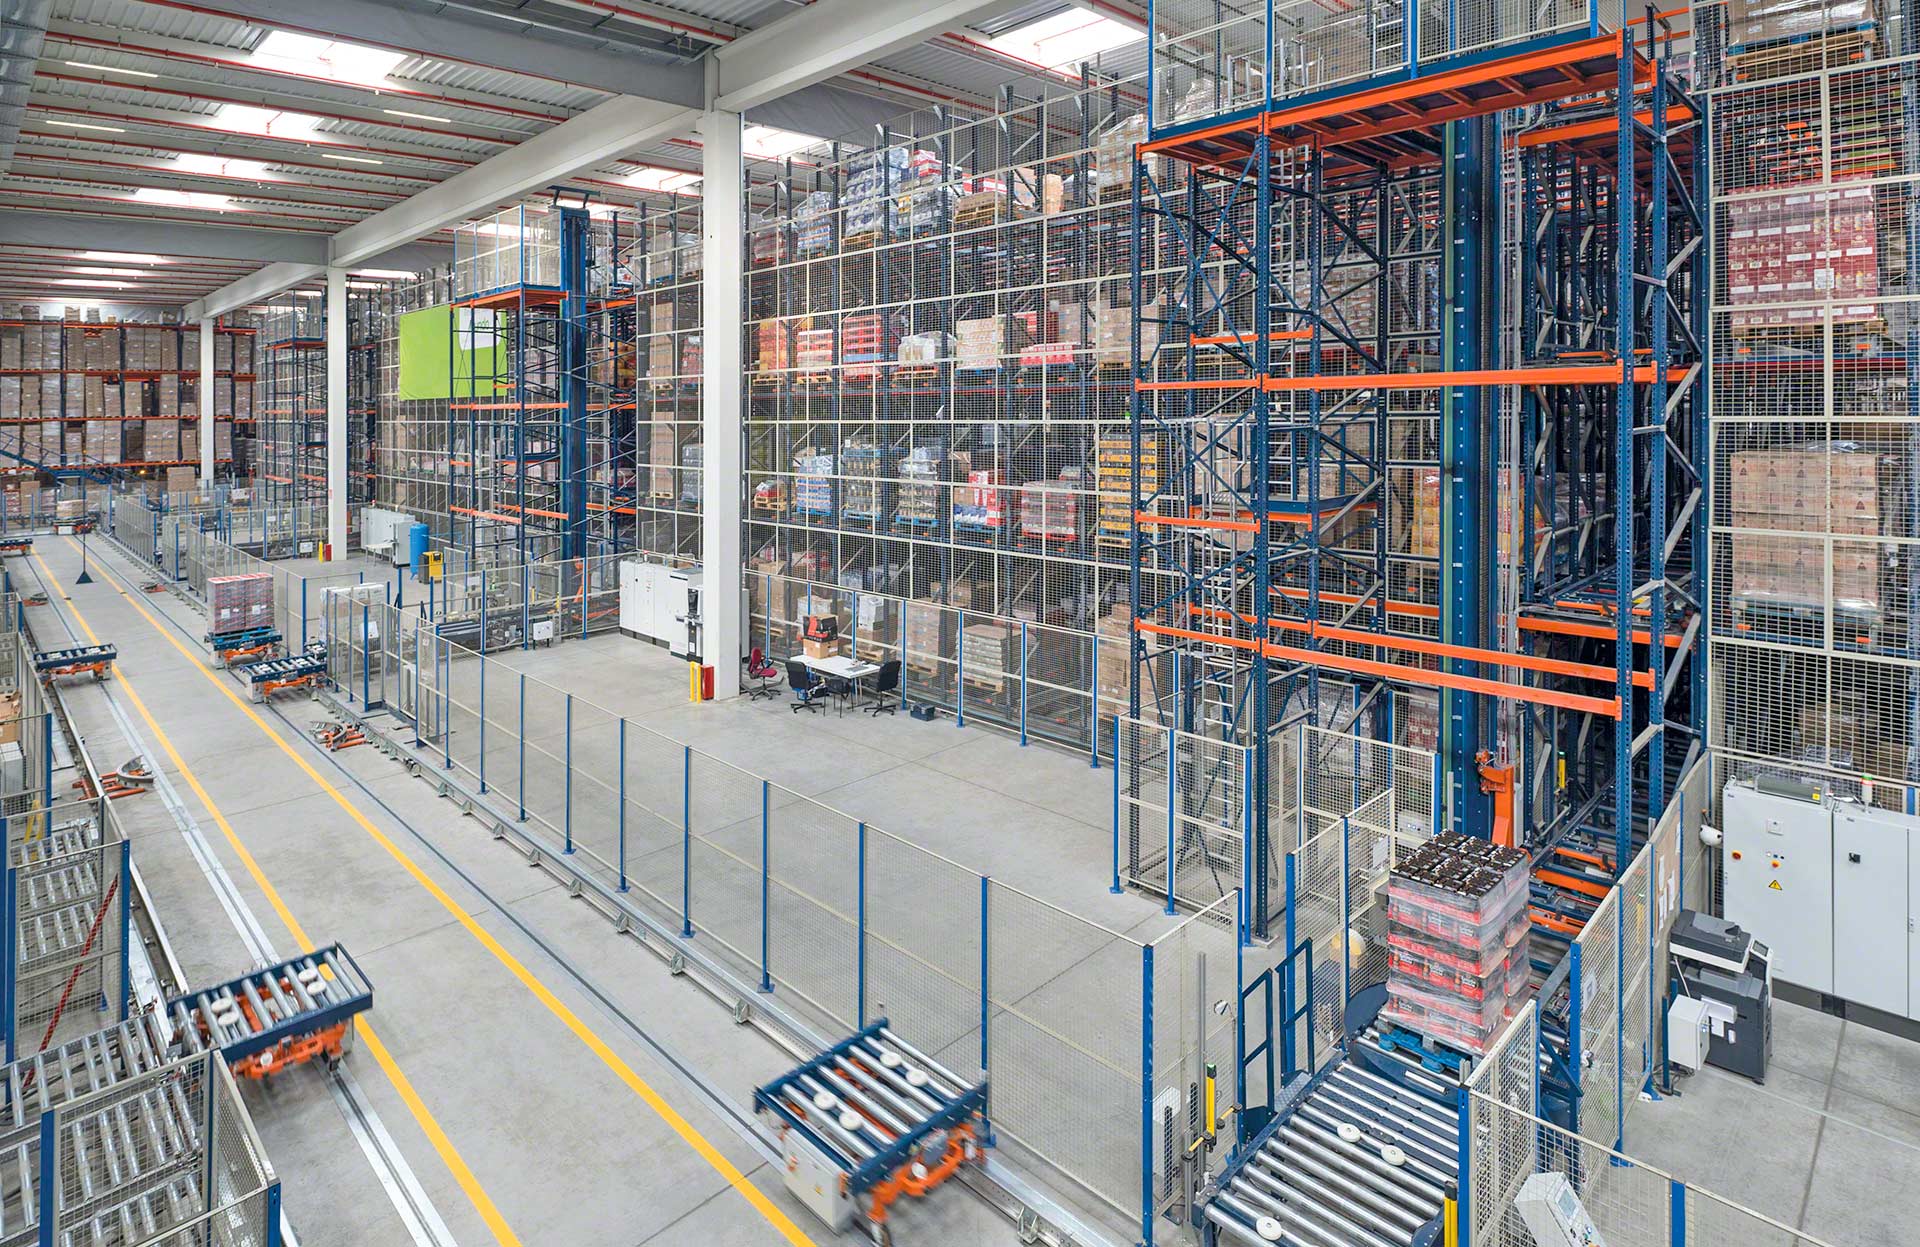 Pallet elevator lifts incorporate a roller or chain conveyor to transfer loads